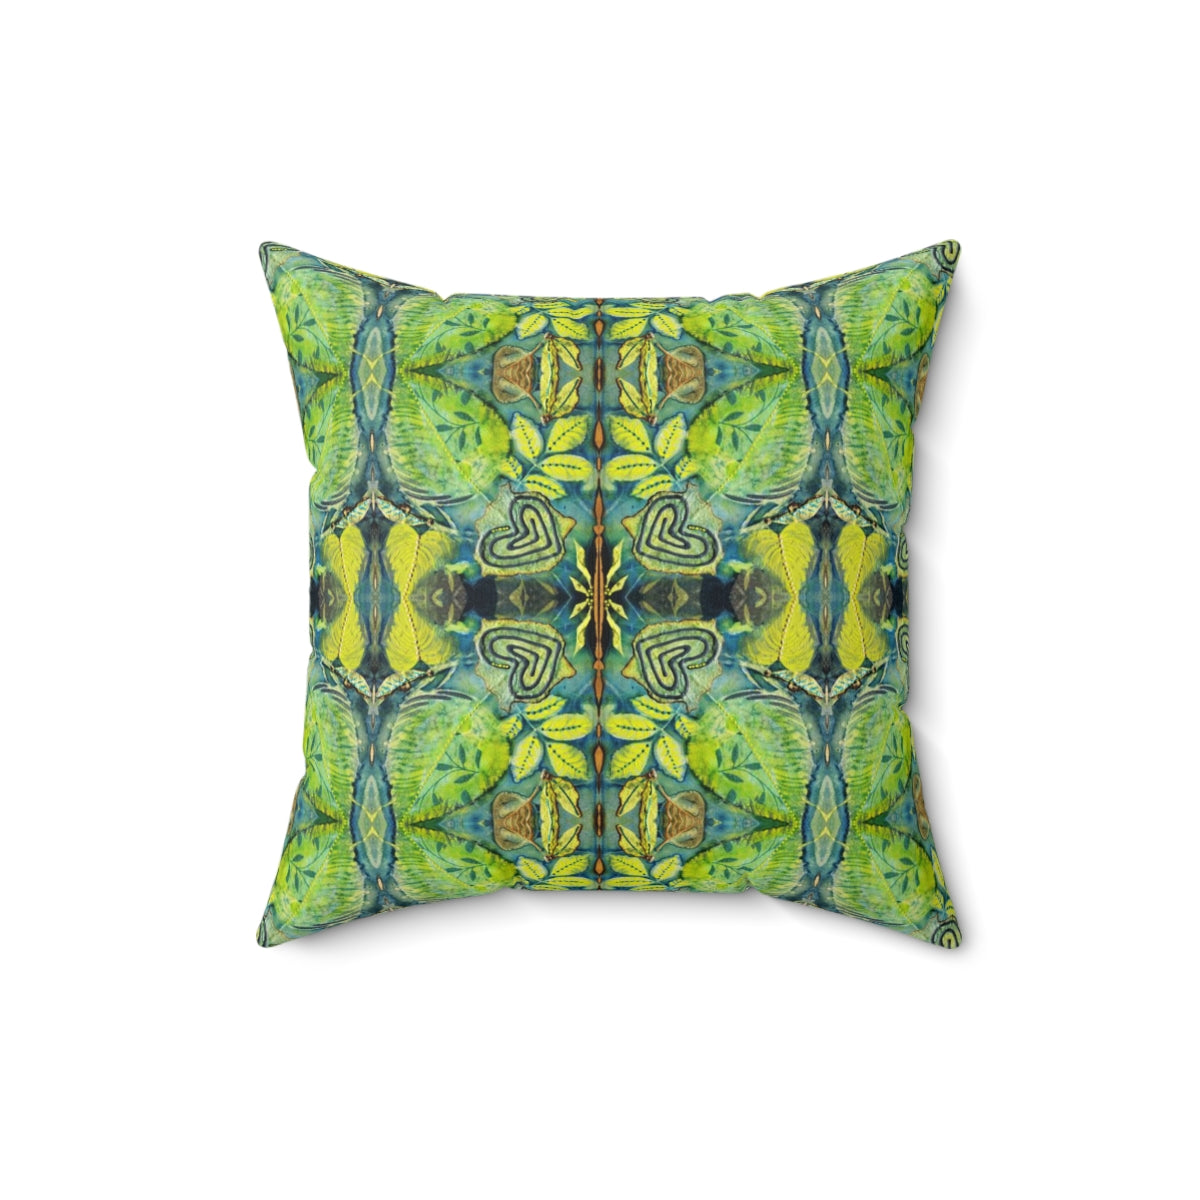 Stylish Lime green navy couch pillow